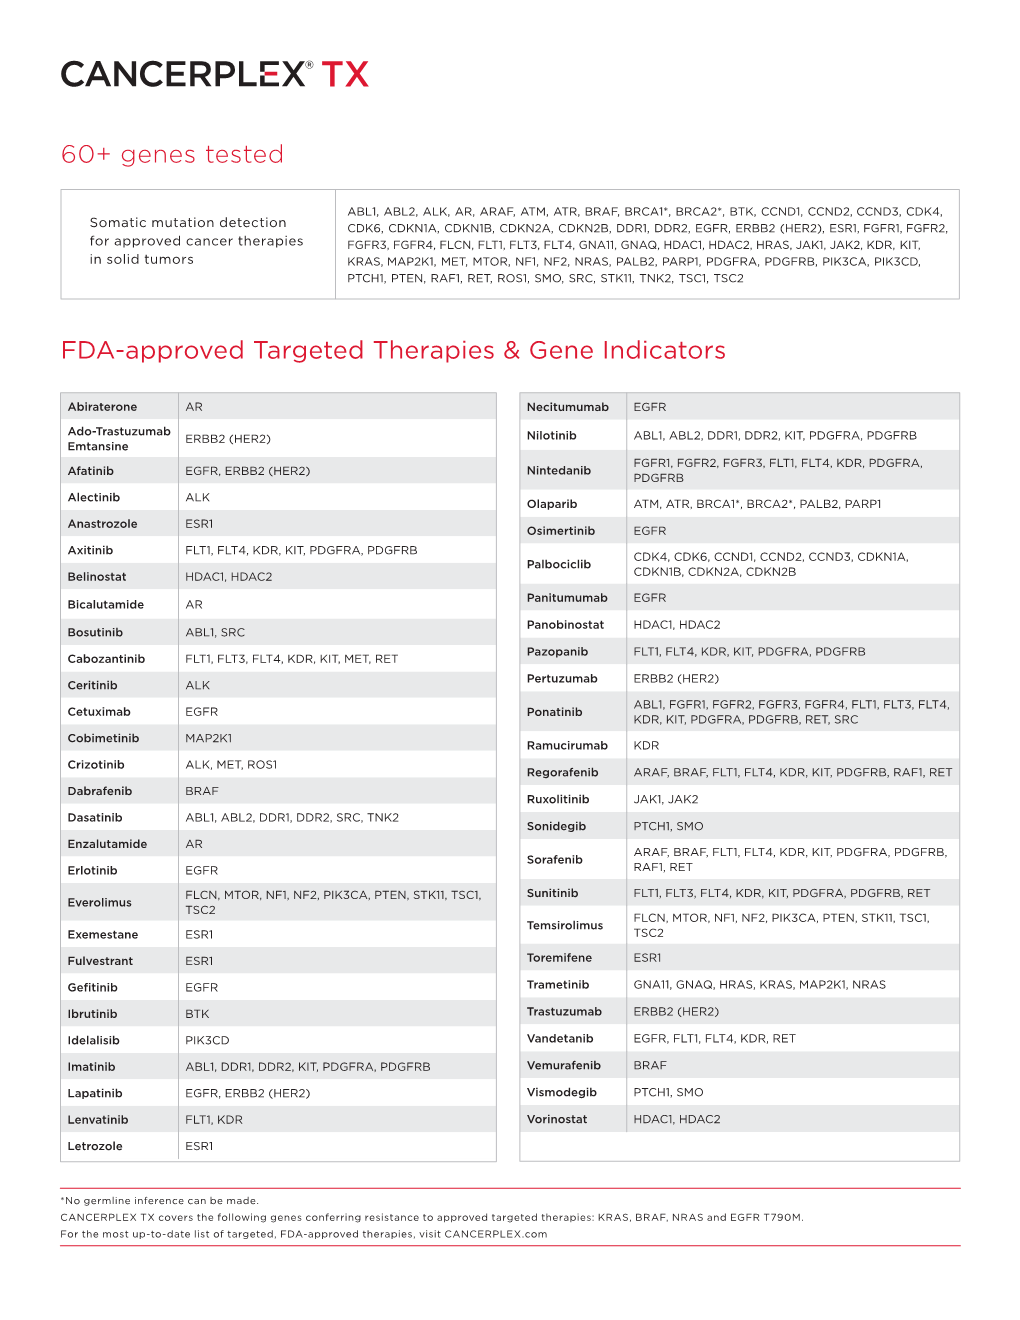 60+ Genes Tested FDA-Approved Targeted Therapies & Gene Indicators